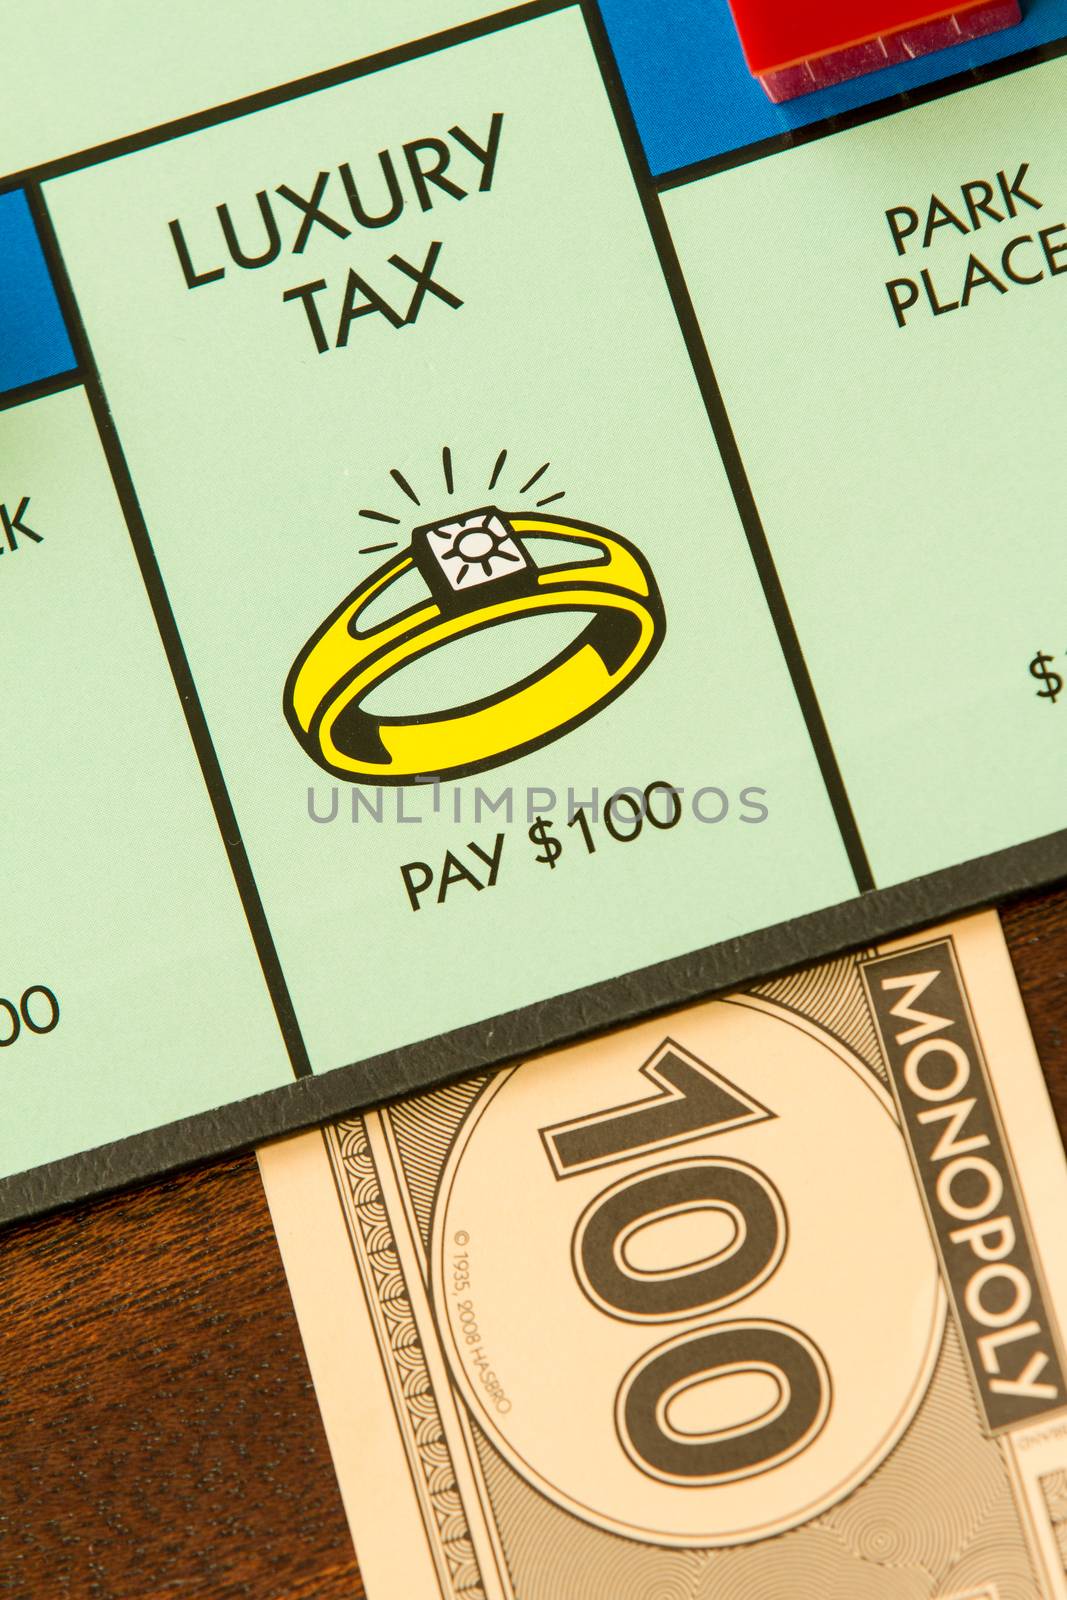 BOISE, IDAHO - NOVEMBER 18, 2012: The imposted luxury tax for landing on the wrong spot of the Hasboro game Monopoly